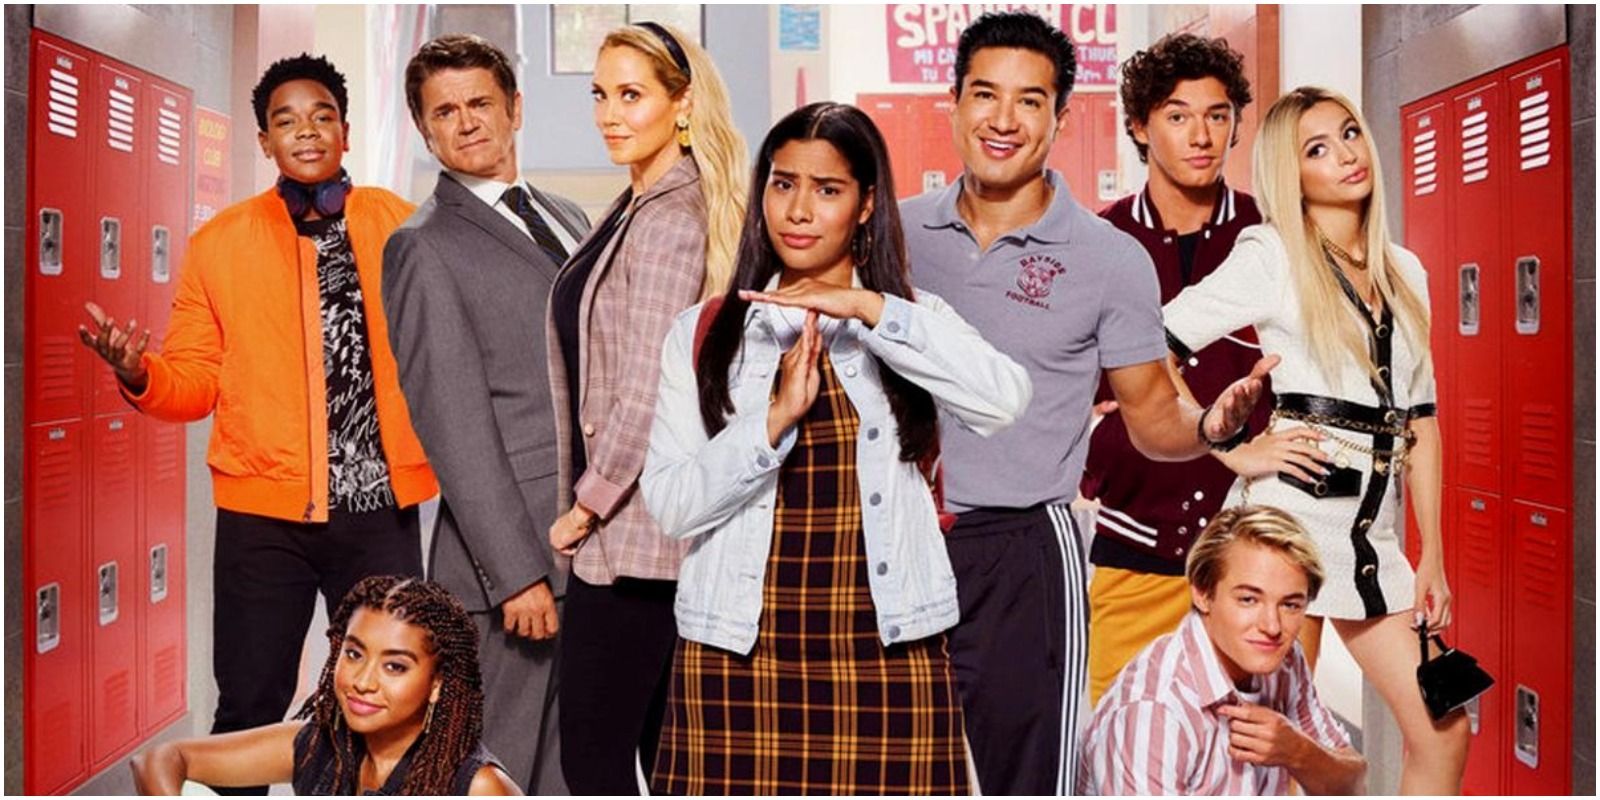 Saved by the Bell Reboot with original characters AC Slater and Jessie Spano